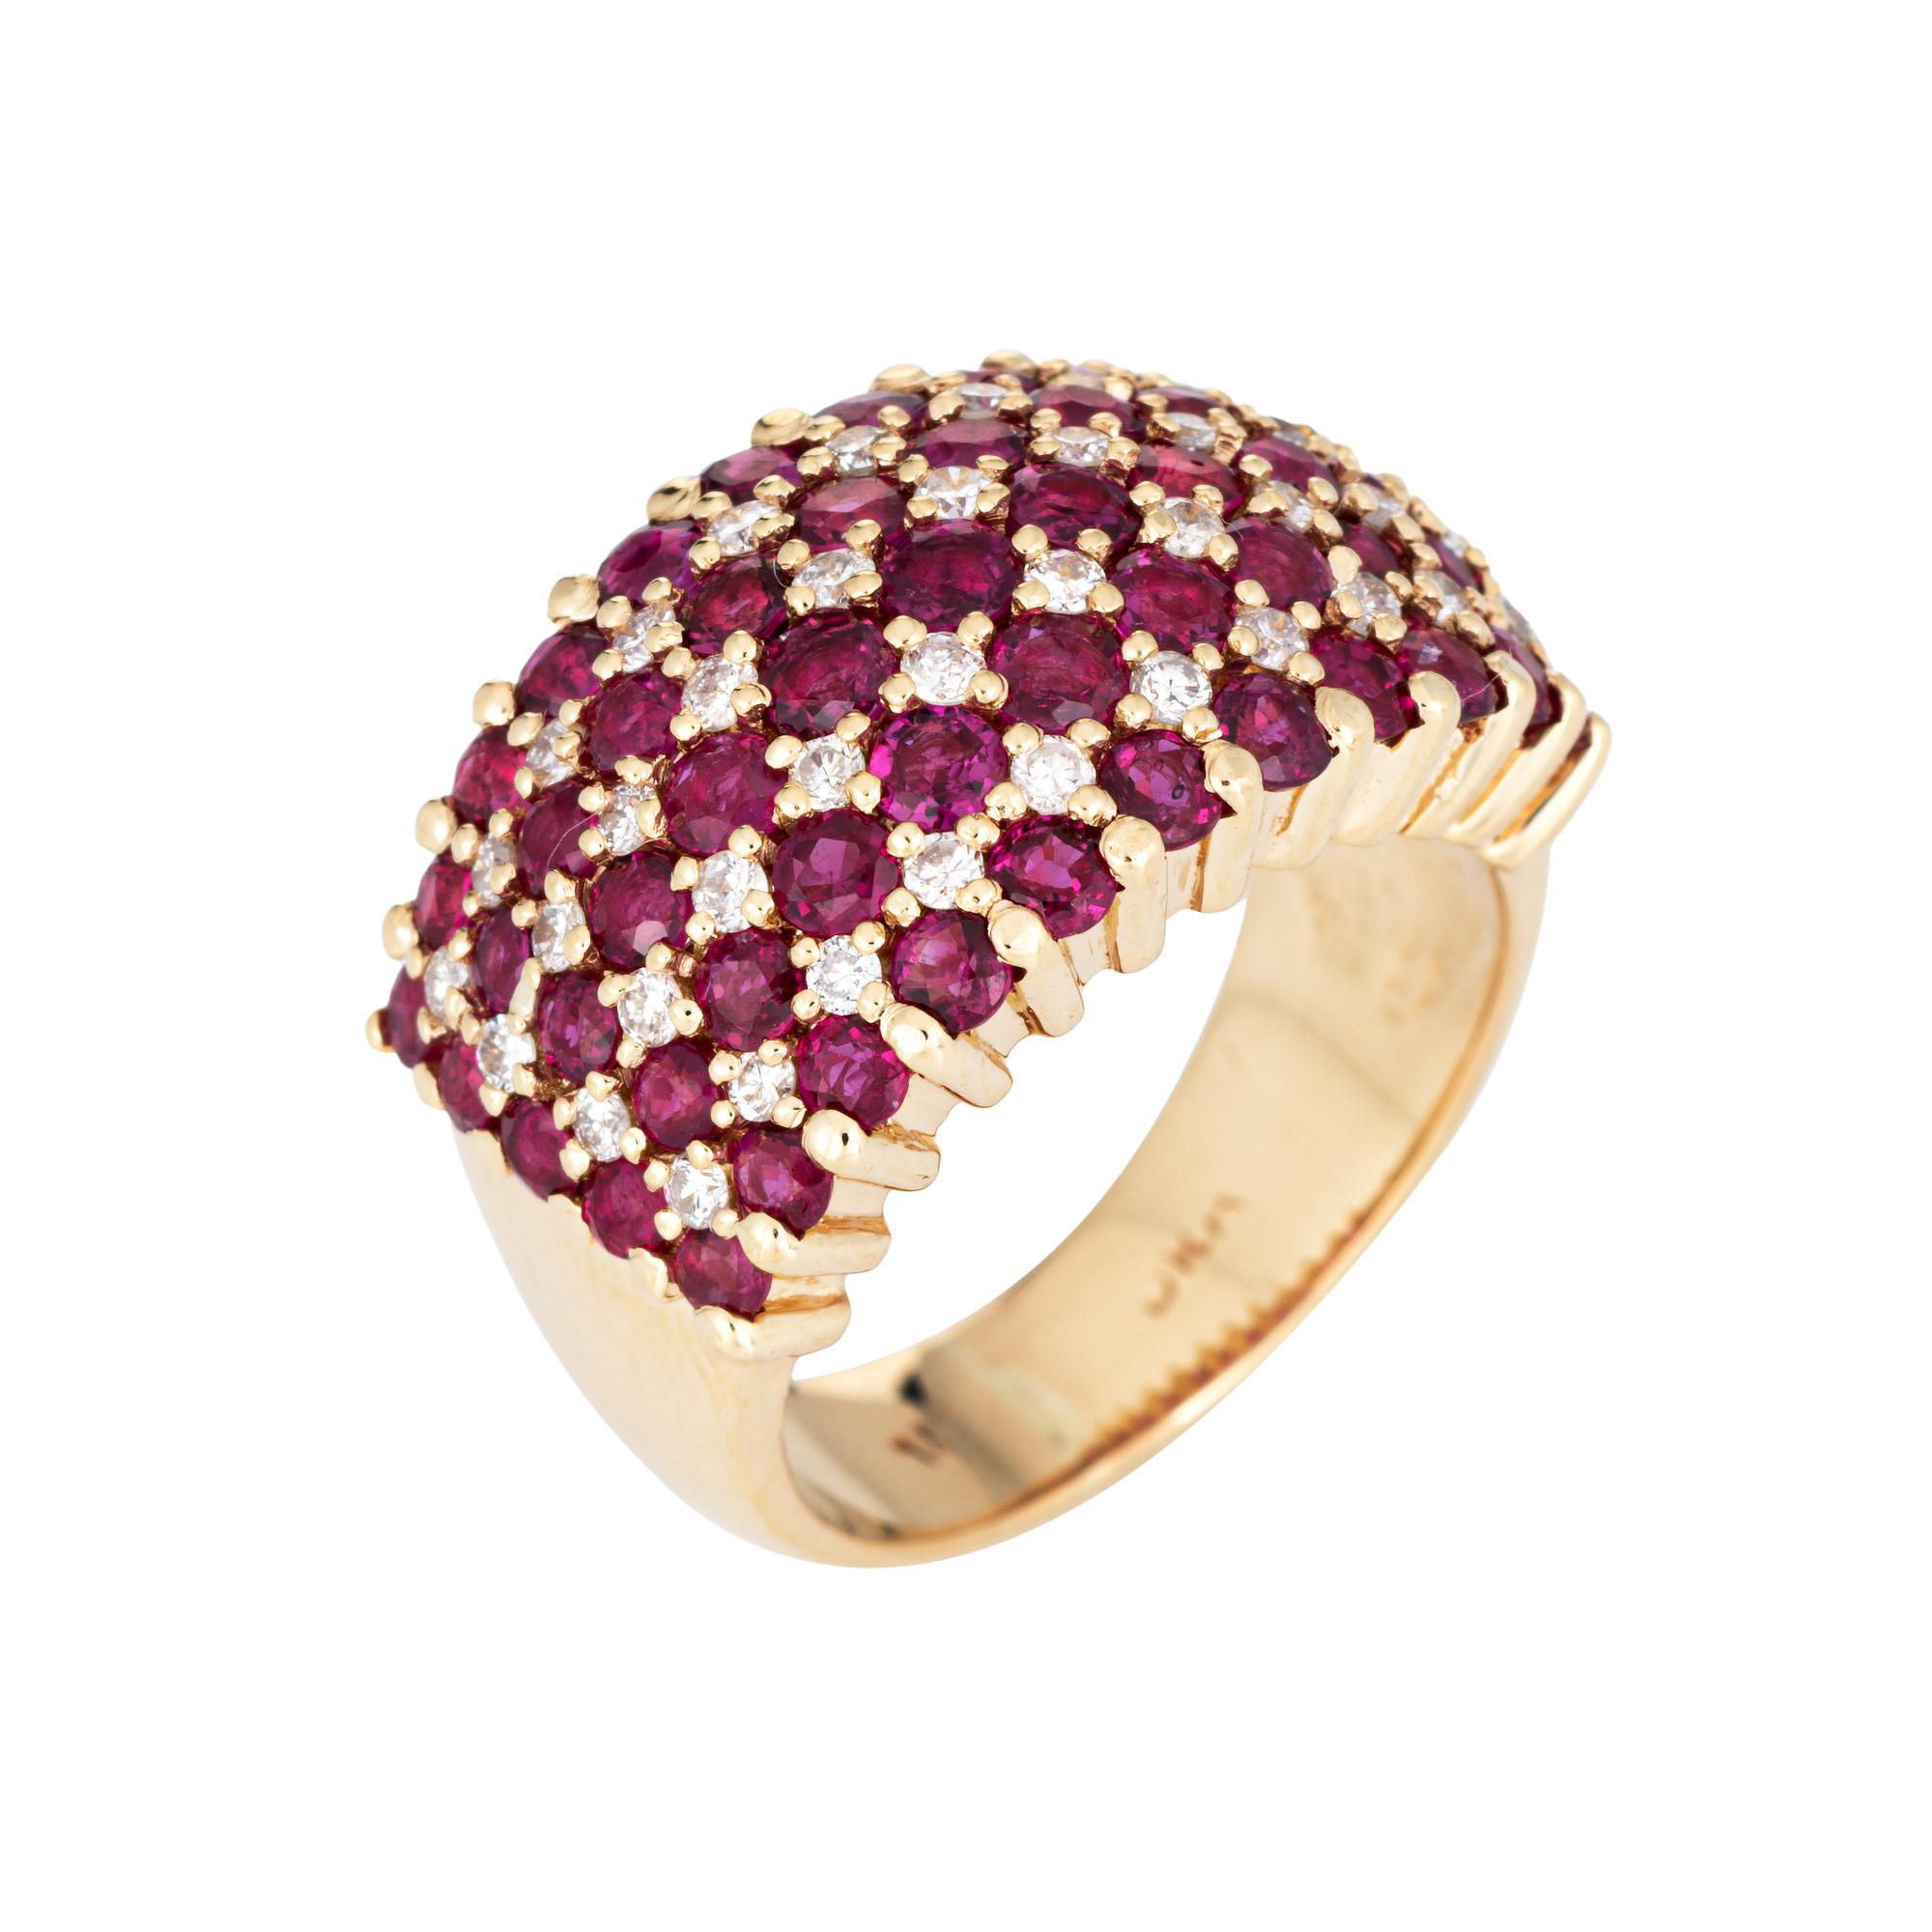 Stylish vintage ruby & diamond cigar band (circa 1980s) crafted in 14 karat yellow gold. 

Forty diamonds total an estimated 0.30 carats (estimated at H-I color and SI1-I1 clarity). Rubies range in size from 1mm to 2mm. The rubies are in good